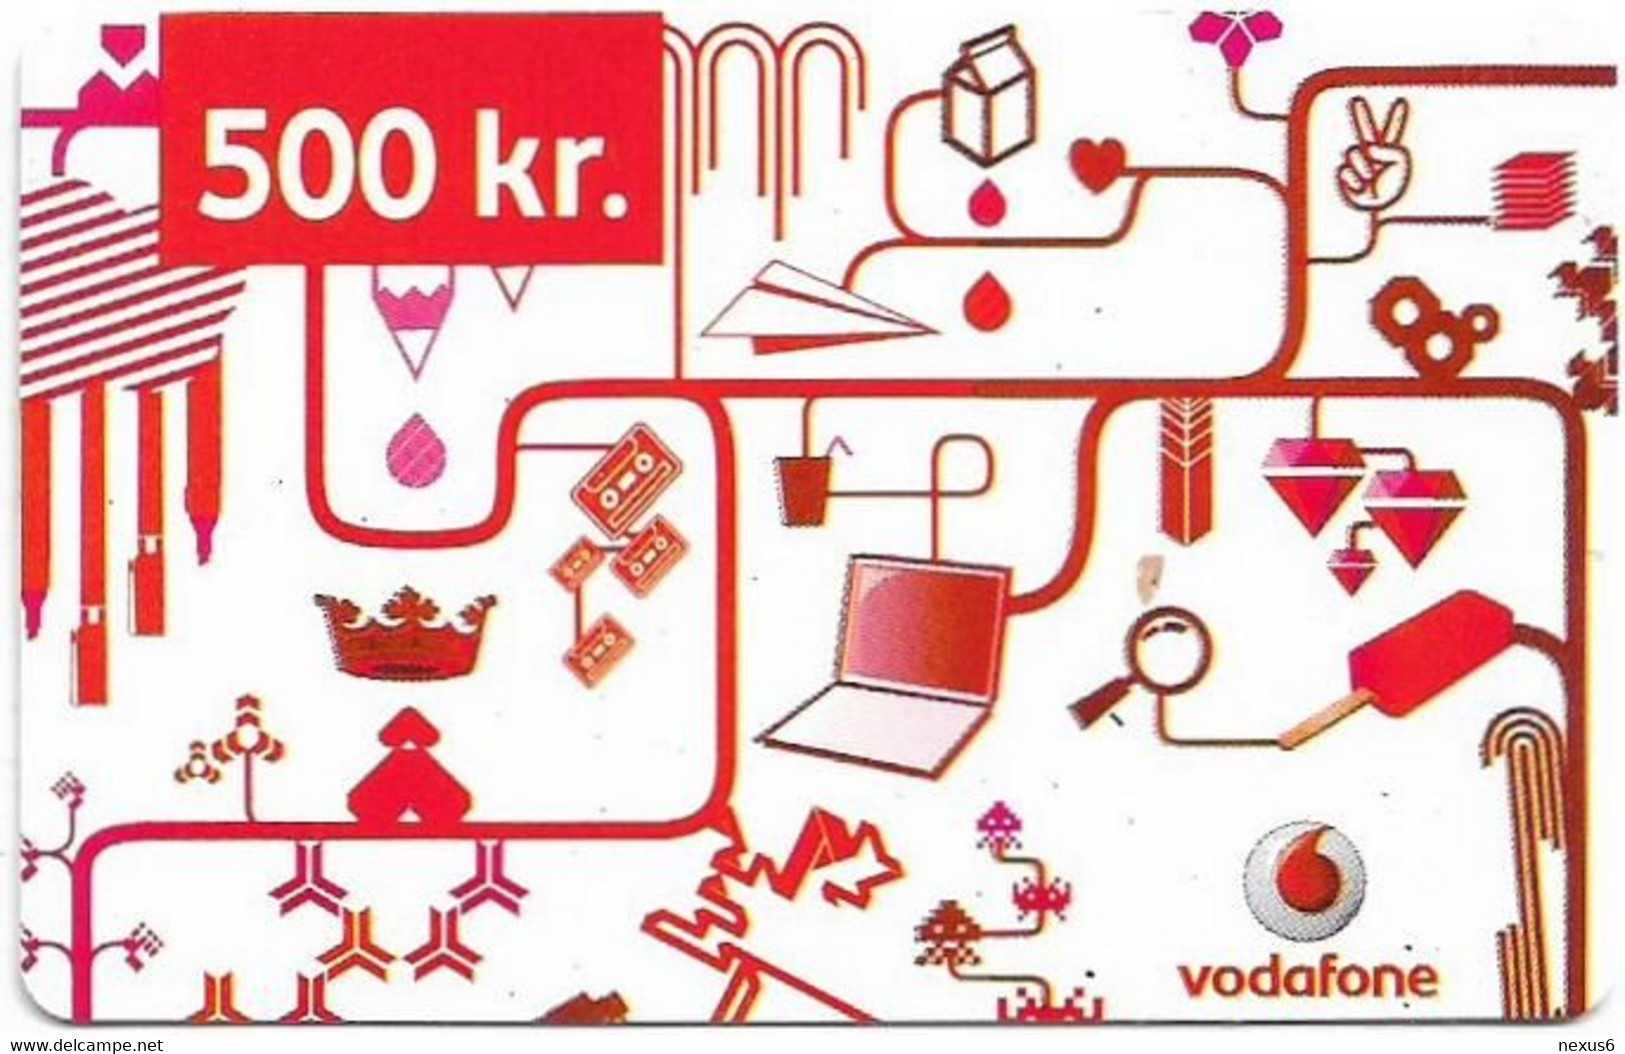 Iceland - Vodafone - Various Objects (Red), Exp.03.06.2009, GSM Refill 500Kr, Used - Iceland